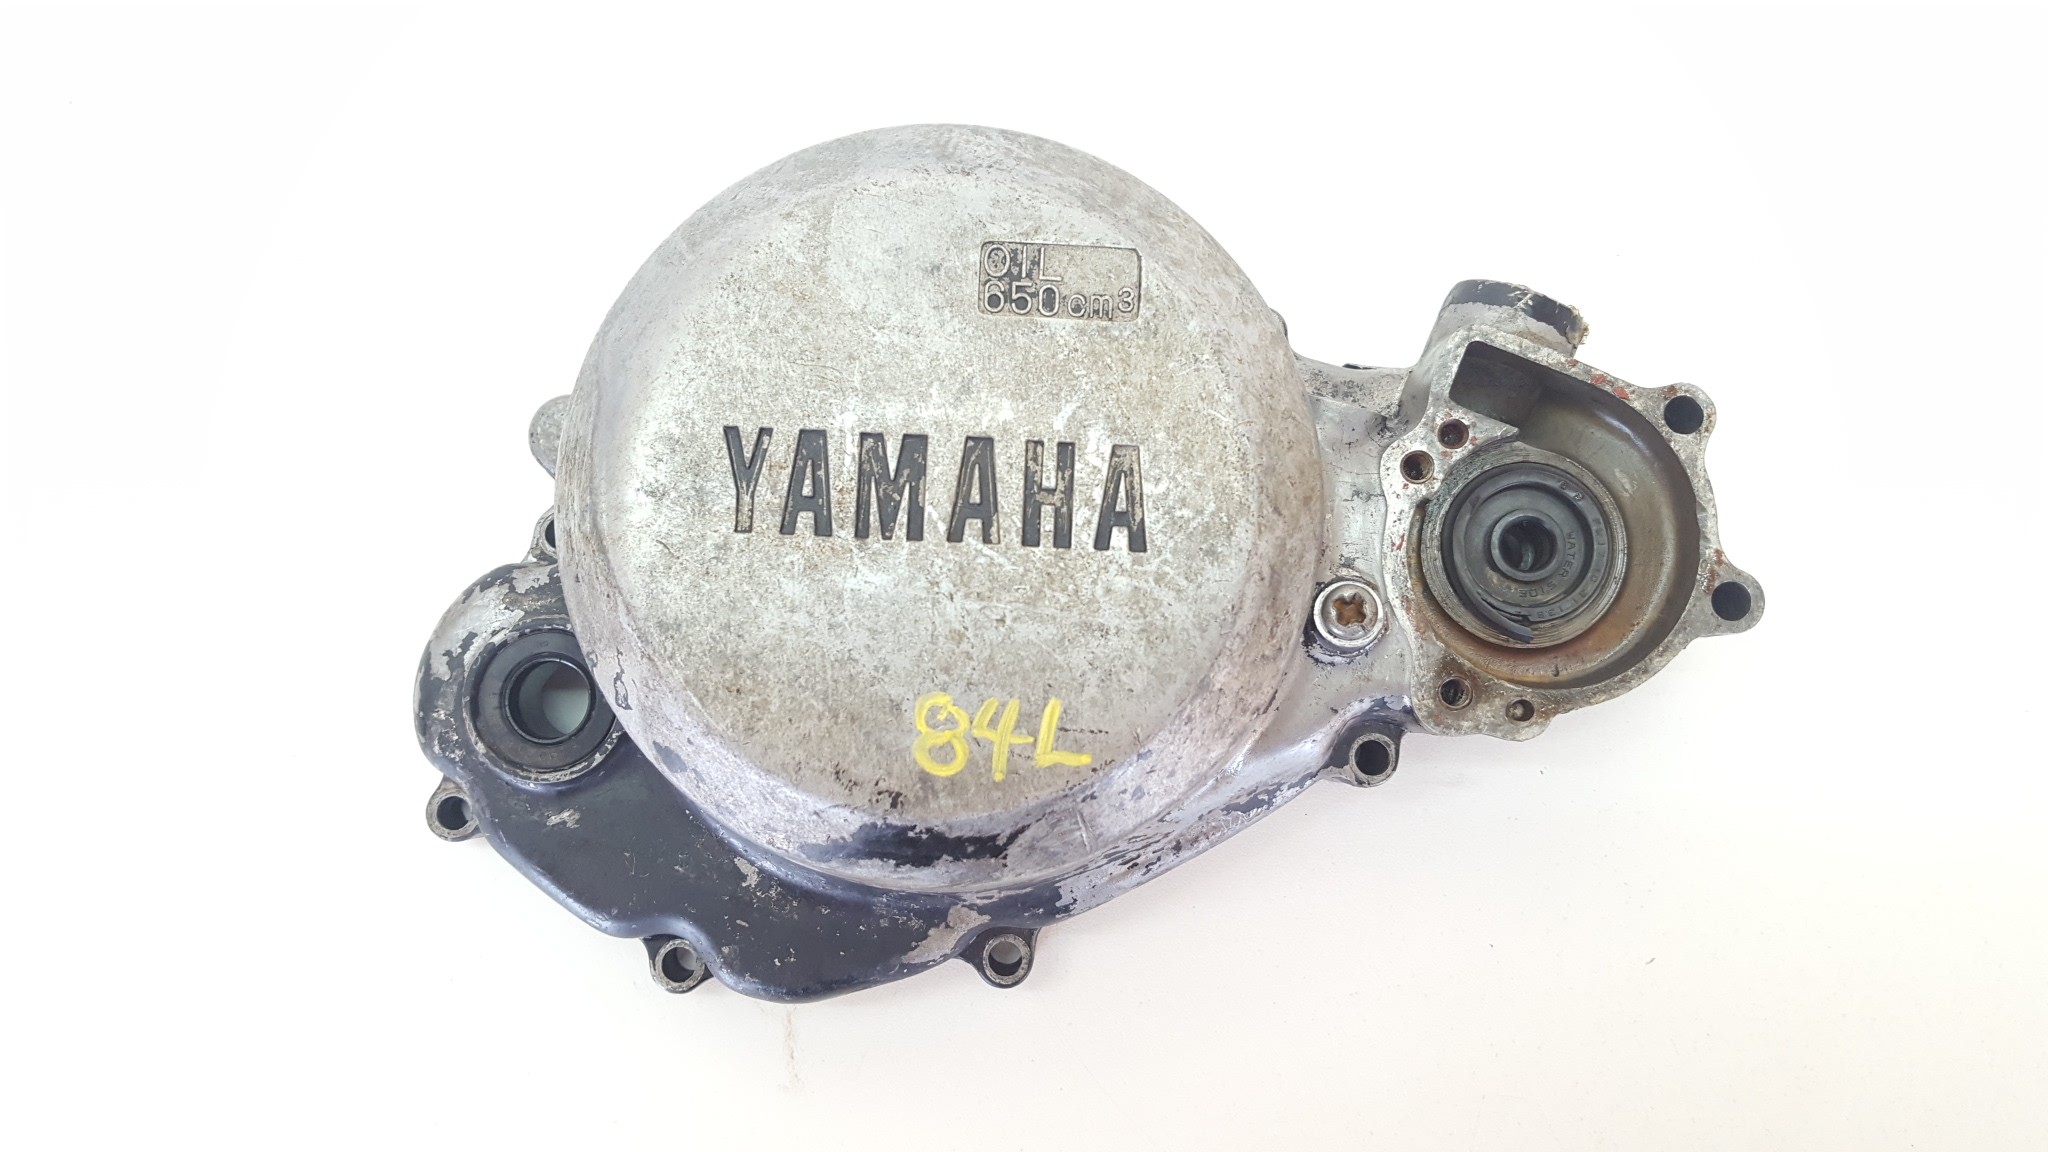 Clutch Right Crankcase Cover Yamaha YZ80 1983-1985 Repair Needed